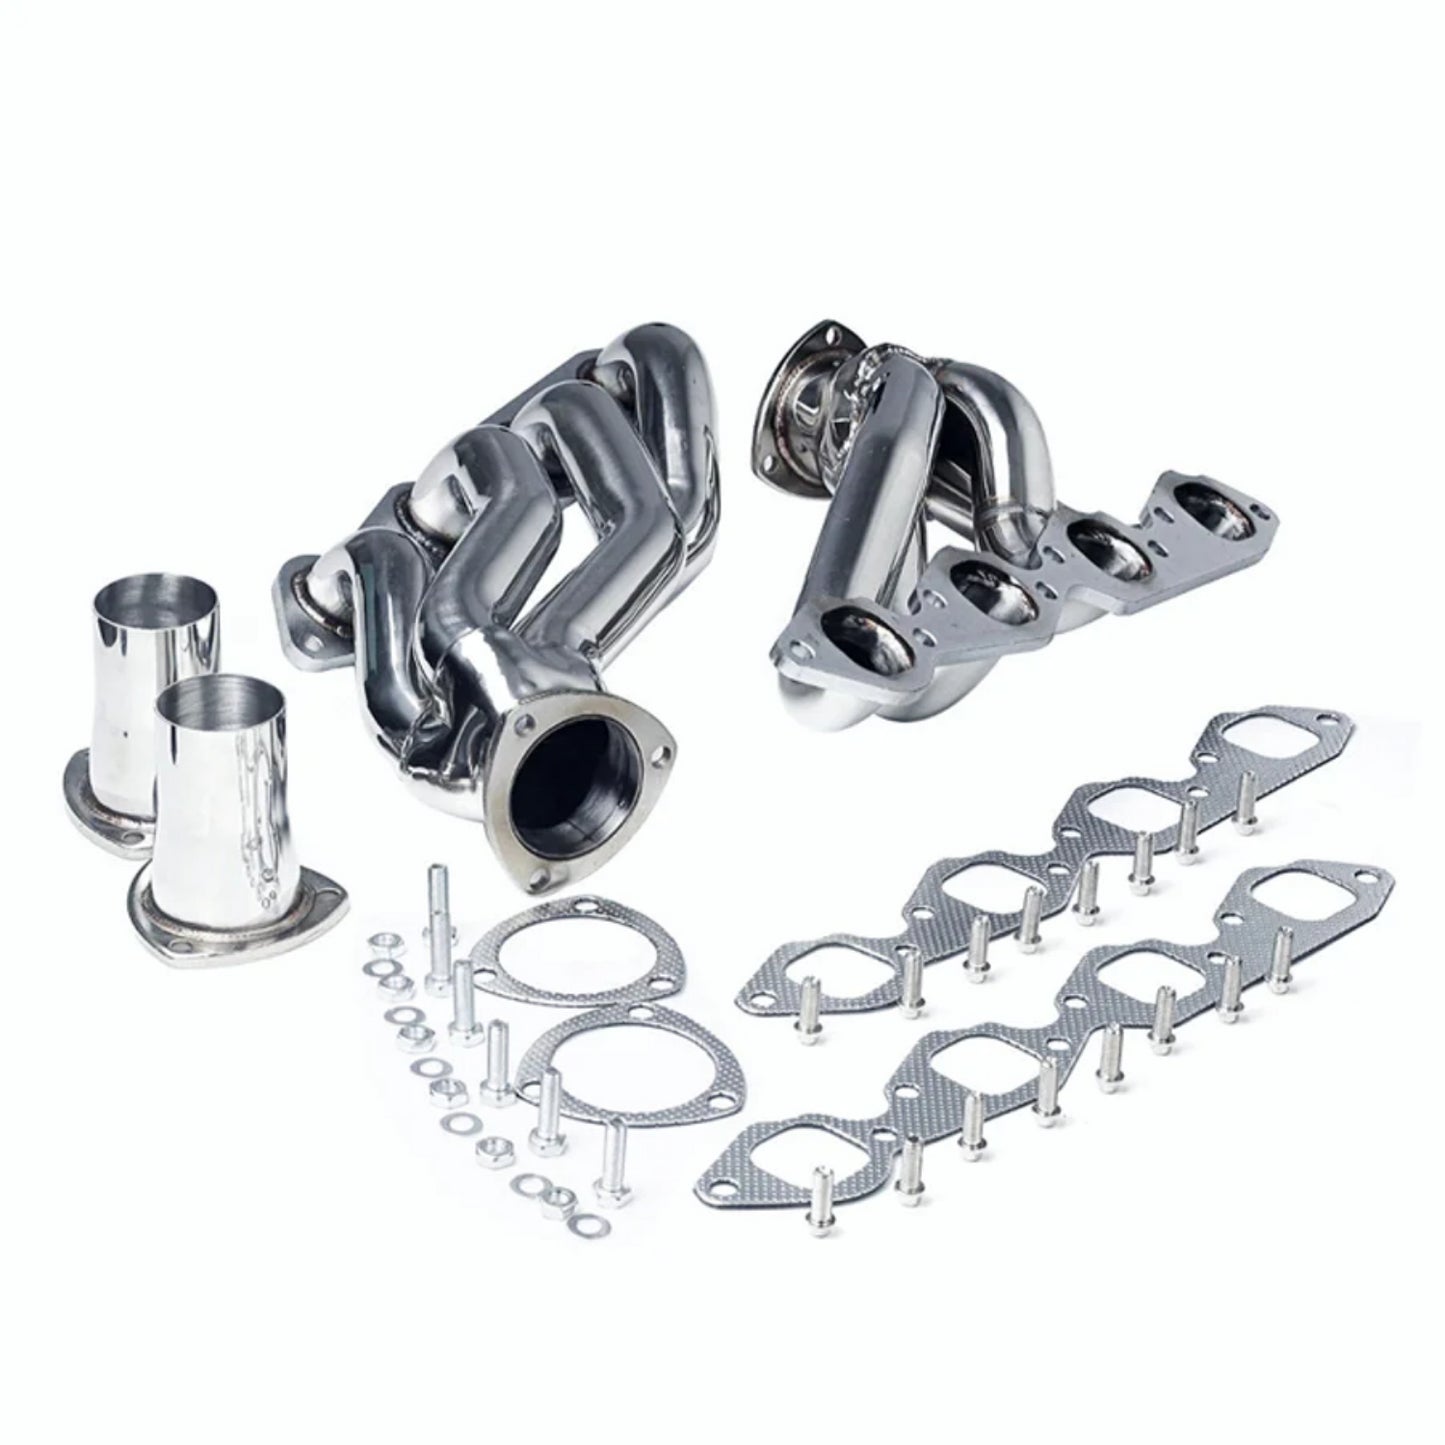 Exhaust Manifold Shorty Racing Header for Chevy Big Block 396/402/427/454/502 V8 Engines